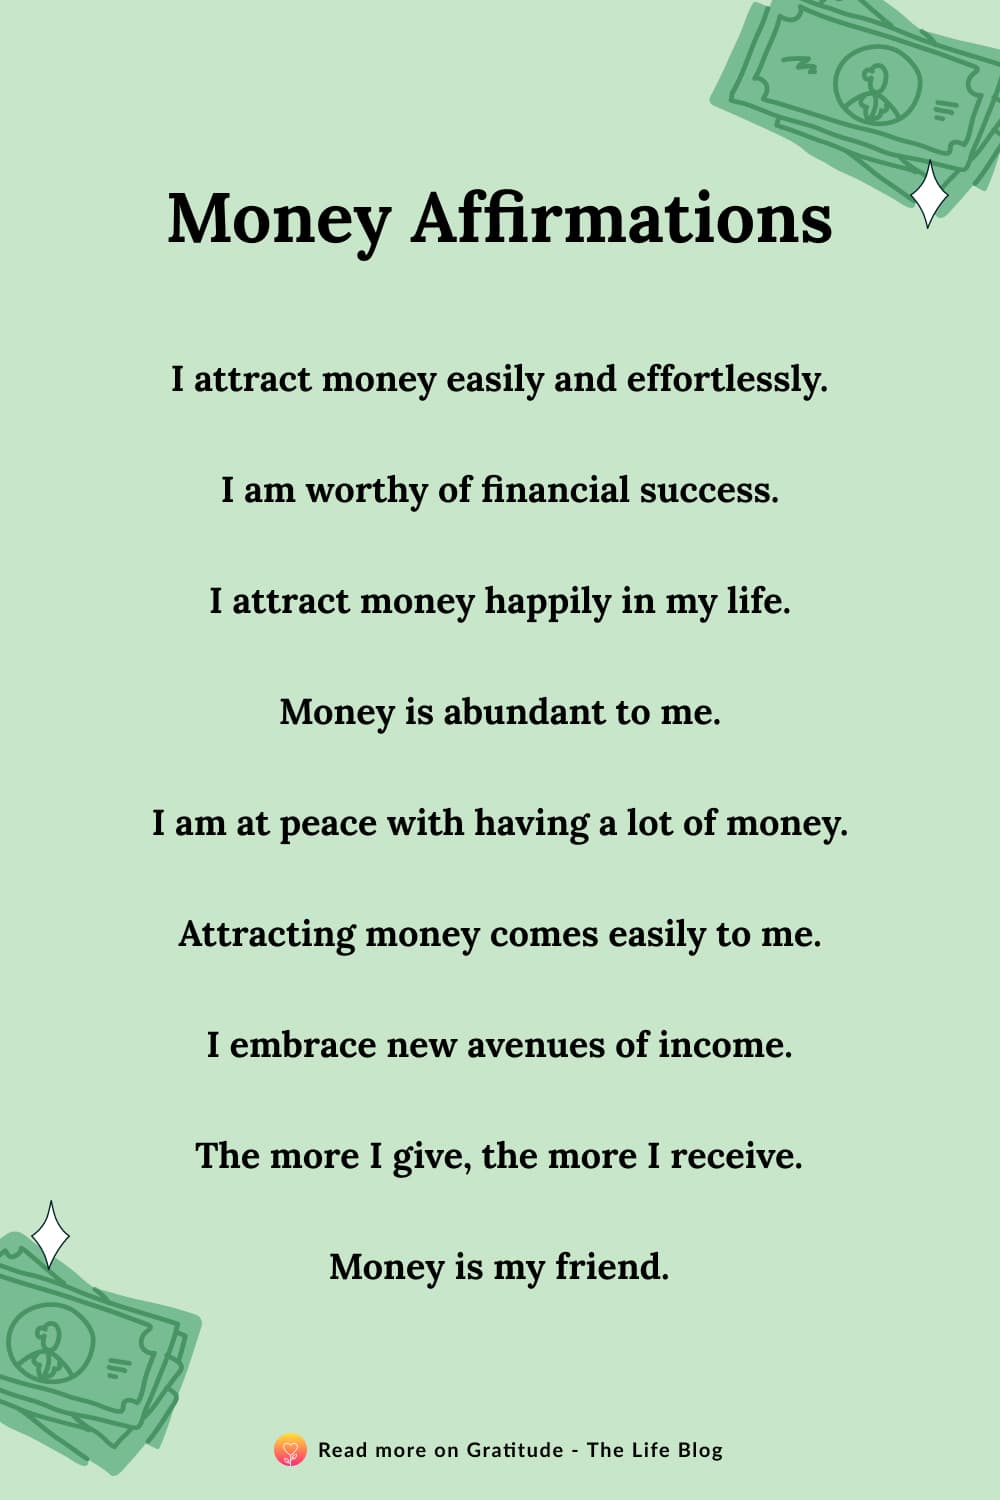 Short Story: The Truth About Wealth Manifestation